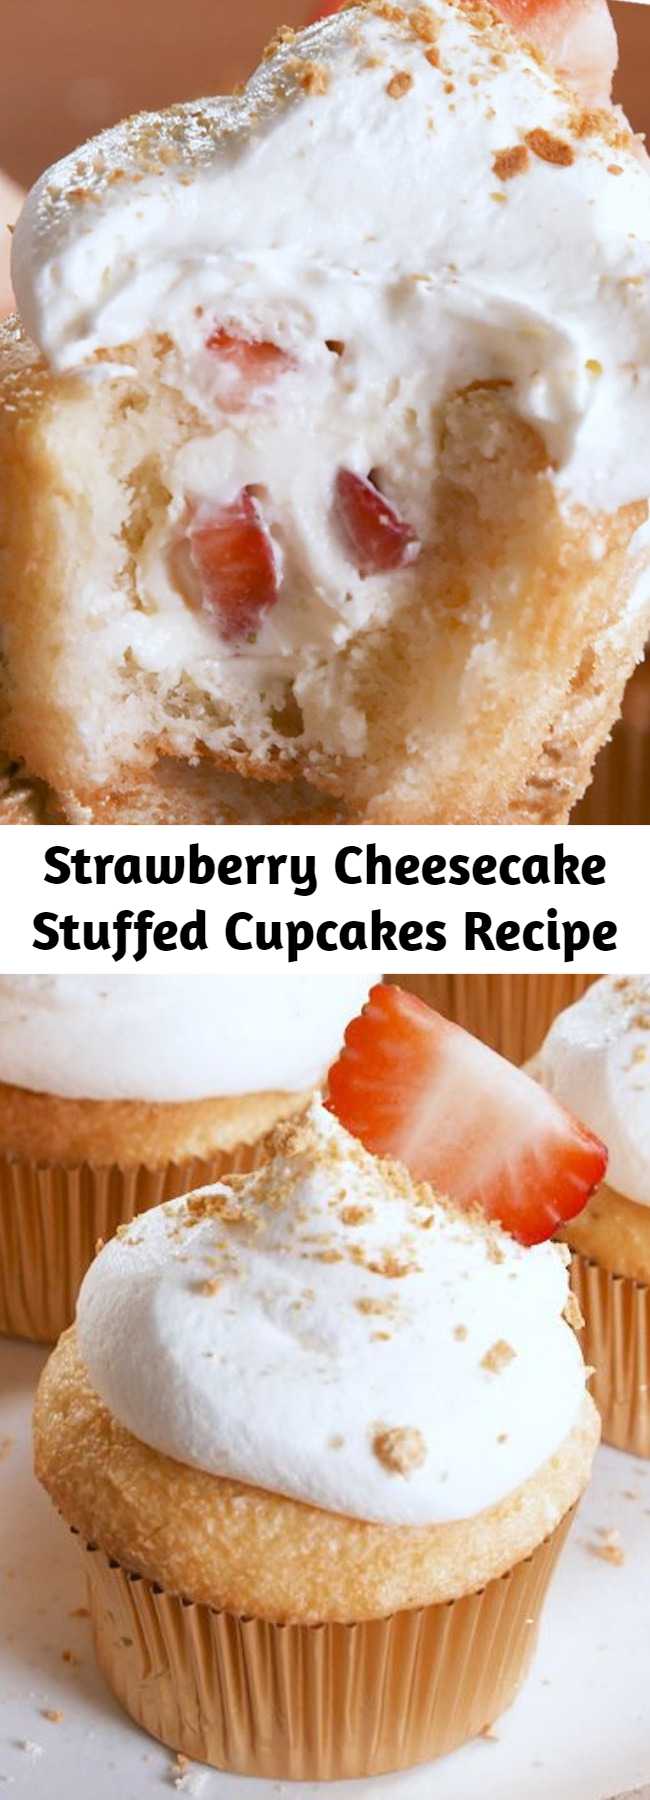 Easy Strawberry Cheesecake Stuffed Cupcakes Recipe - Strawberry Cheesecake STUFFED Cupcakes are your two favorite desserts in one. #recipe #easyrecipe #easy #dessert #dessertrecipe #baking #cheesecake #cheese #cake #whippedcream #berries #fruit #strawberries #cupcakes